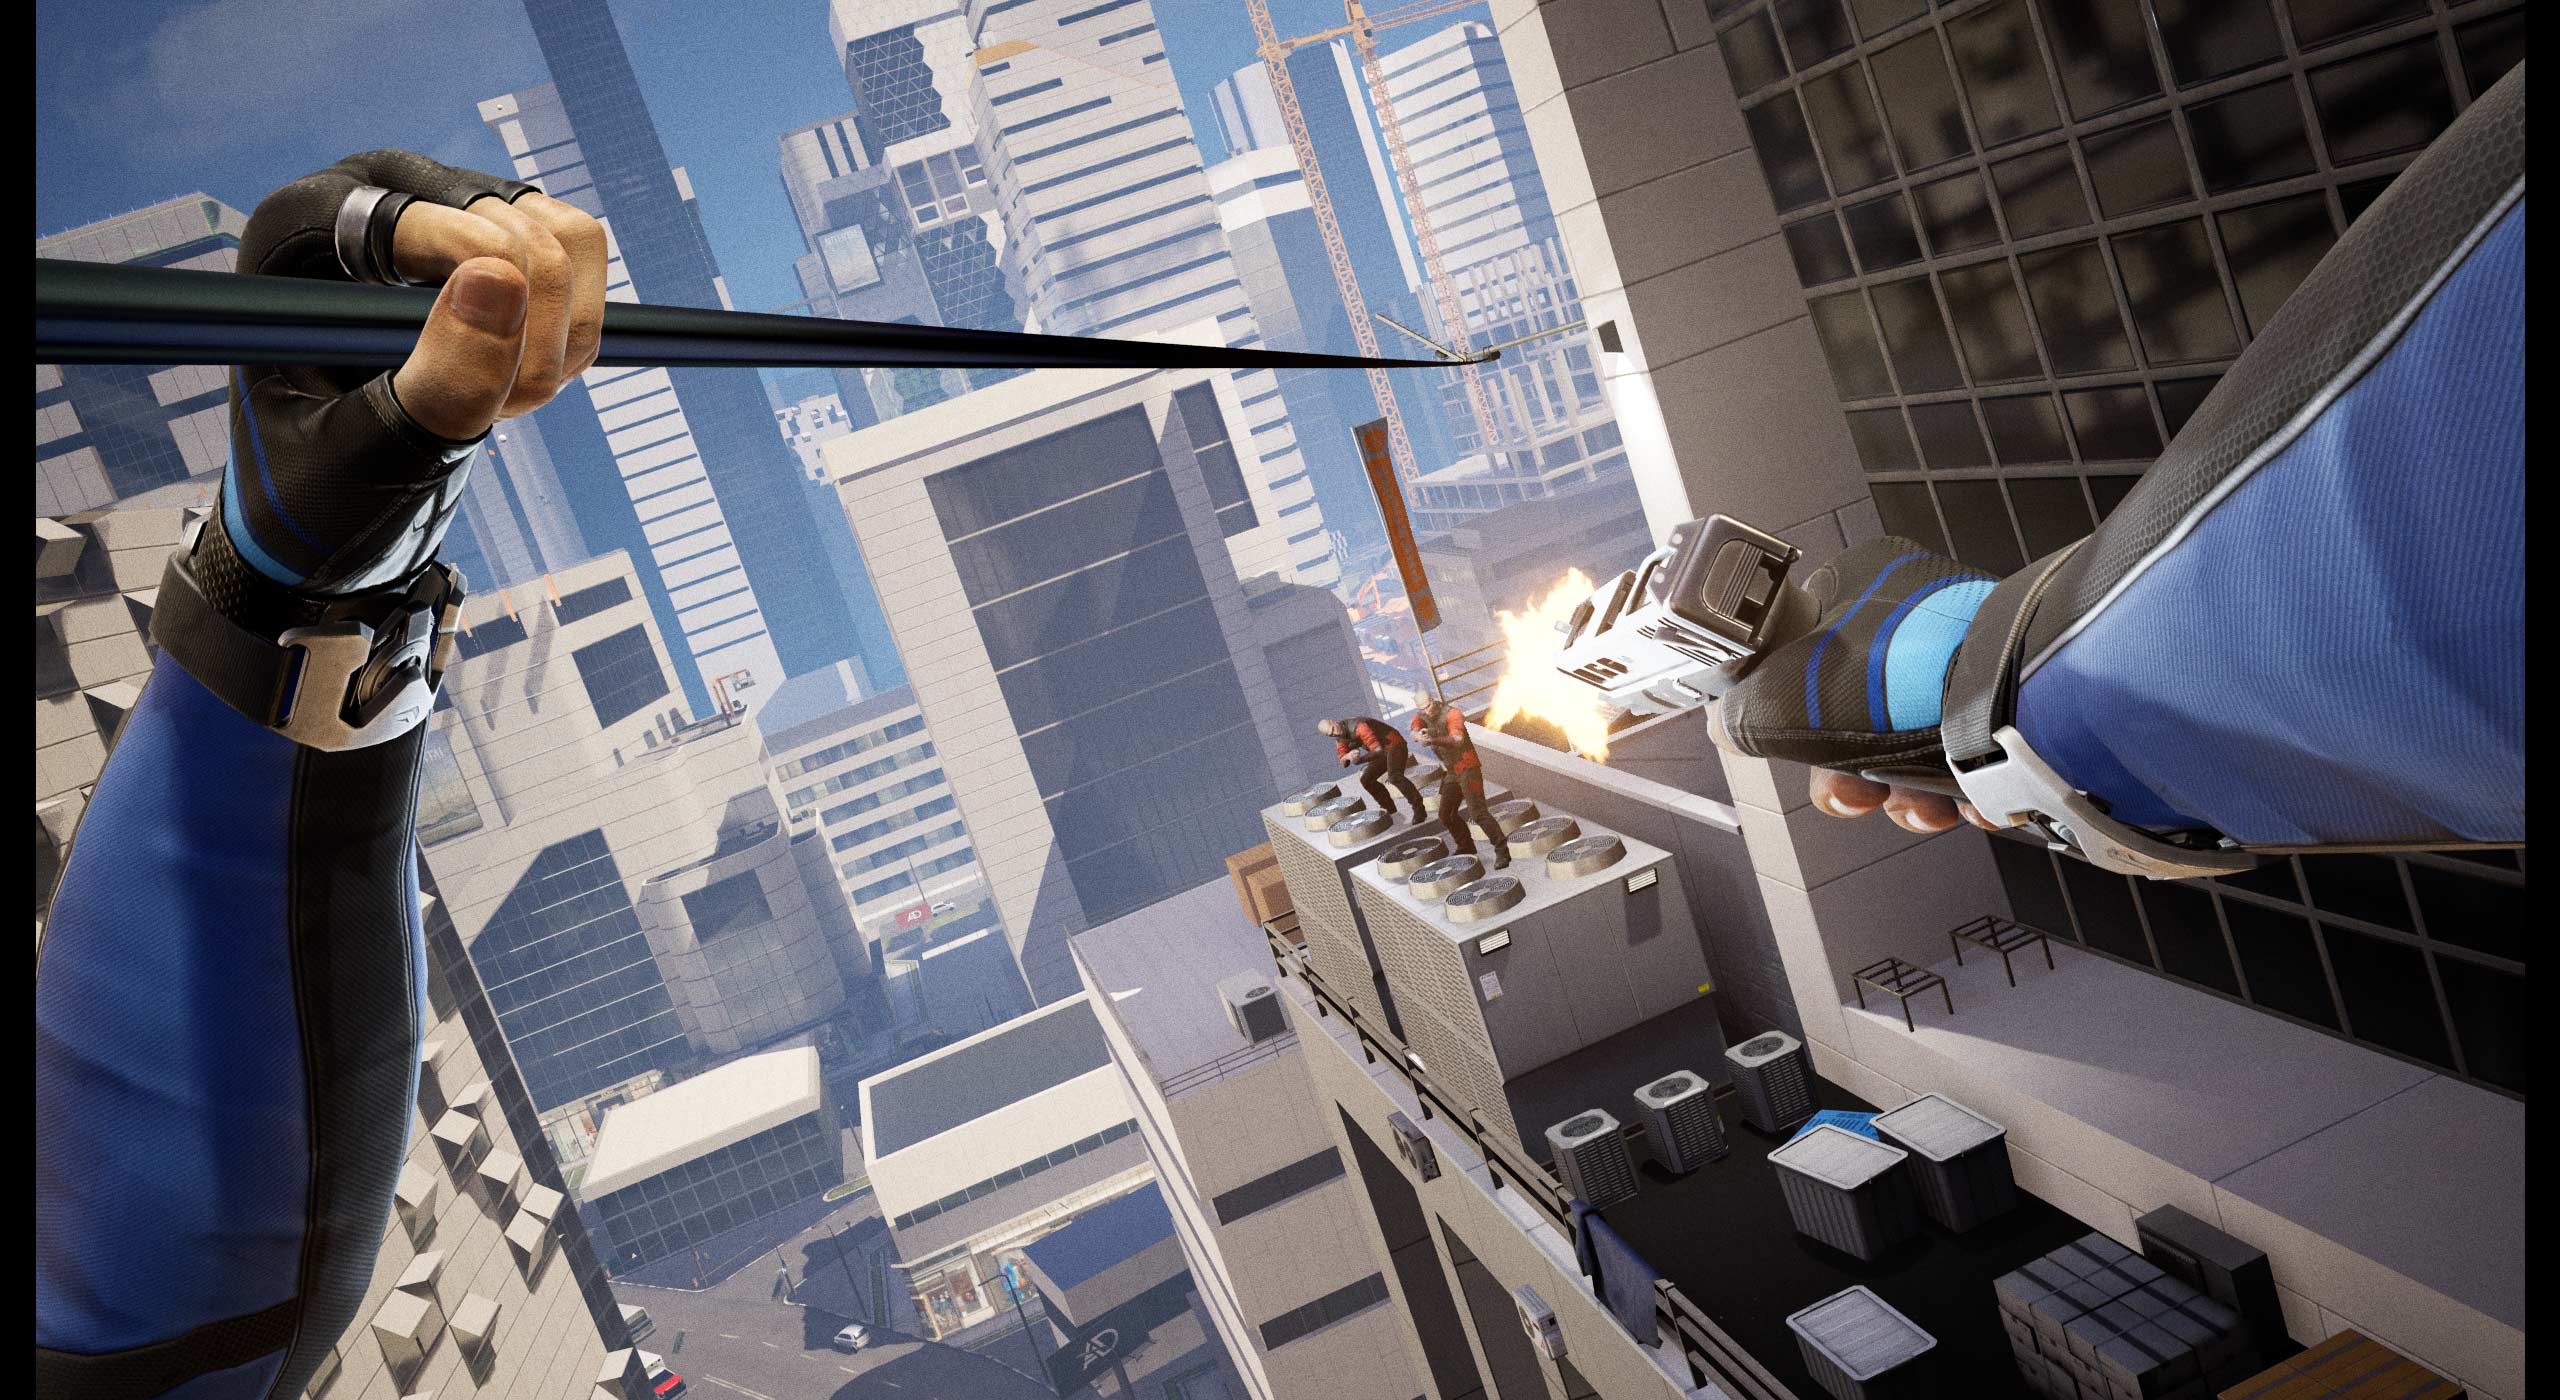 How to Make MIRROR'S EDGE 3 the Game of the Year 